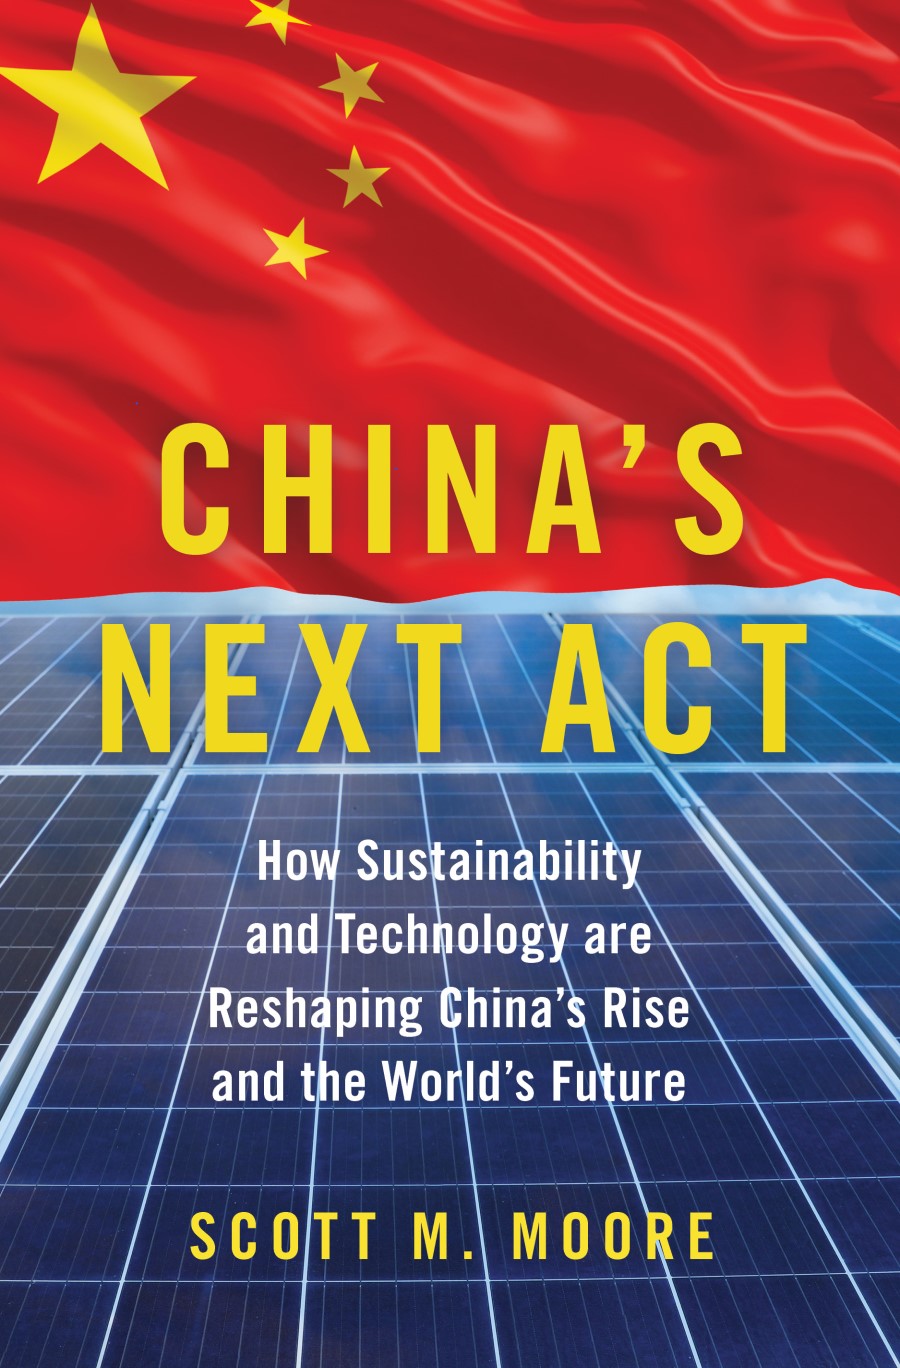 China's Next Act: How Sustainability and Technology are Reshaping China's Rise and the World's Future